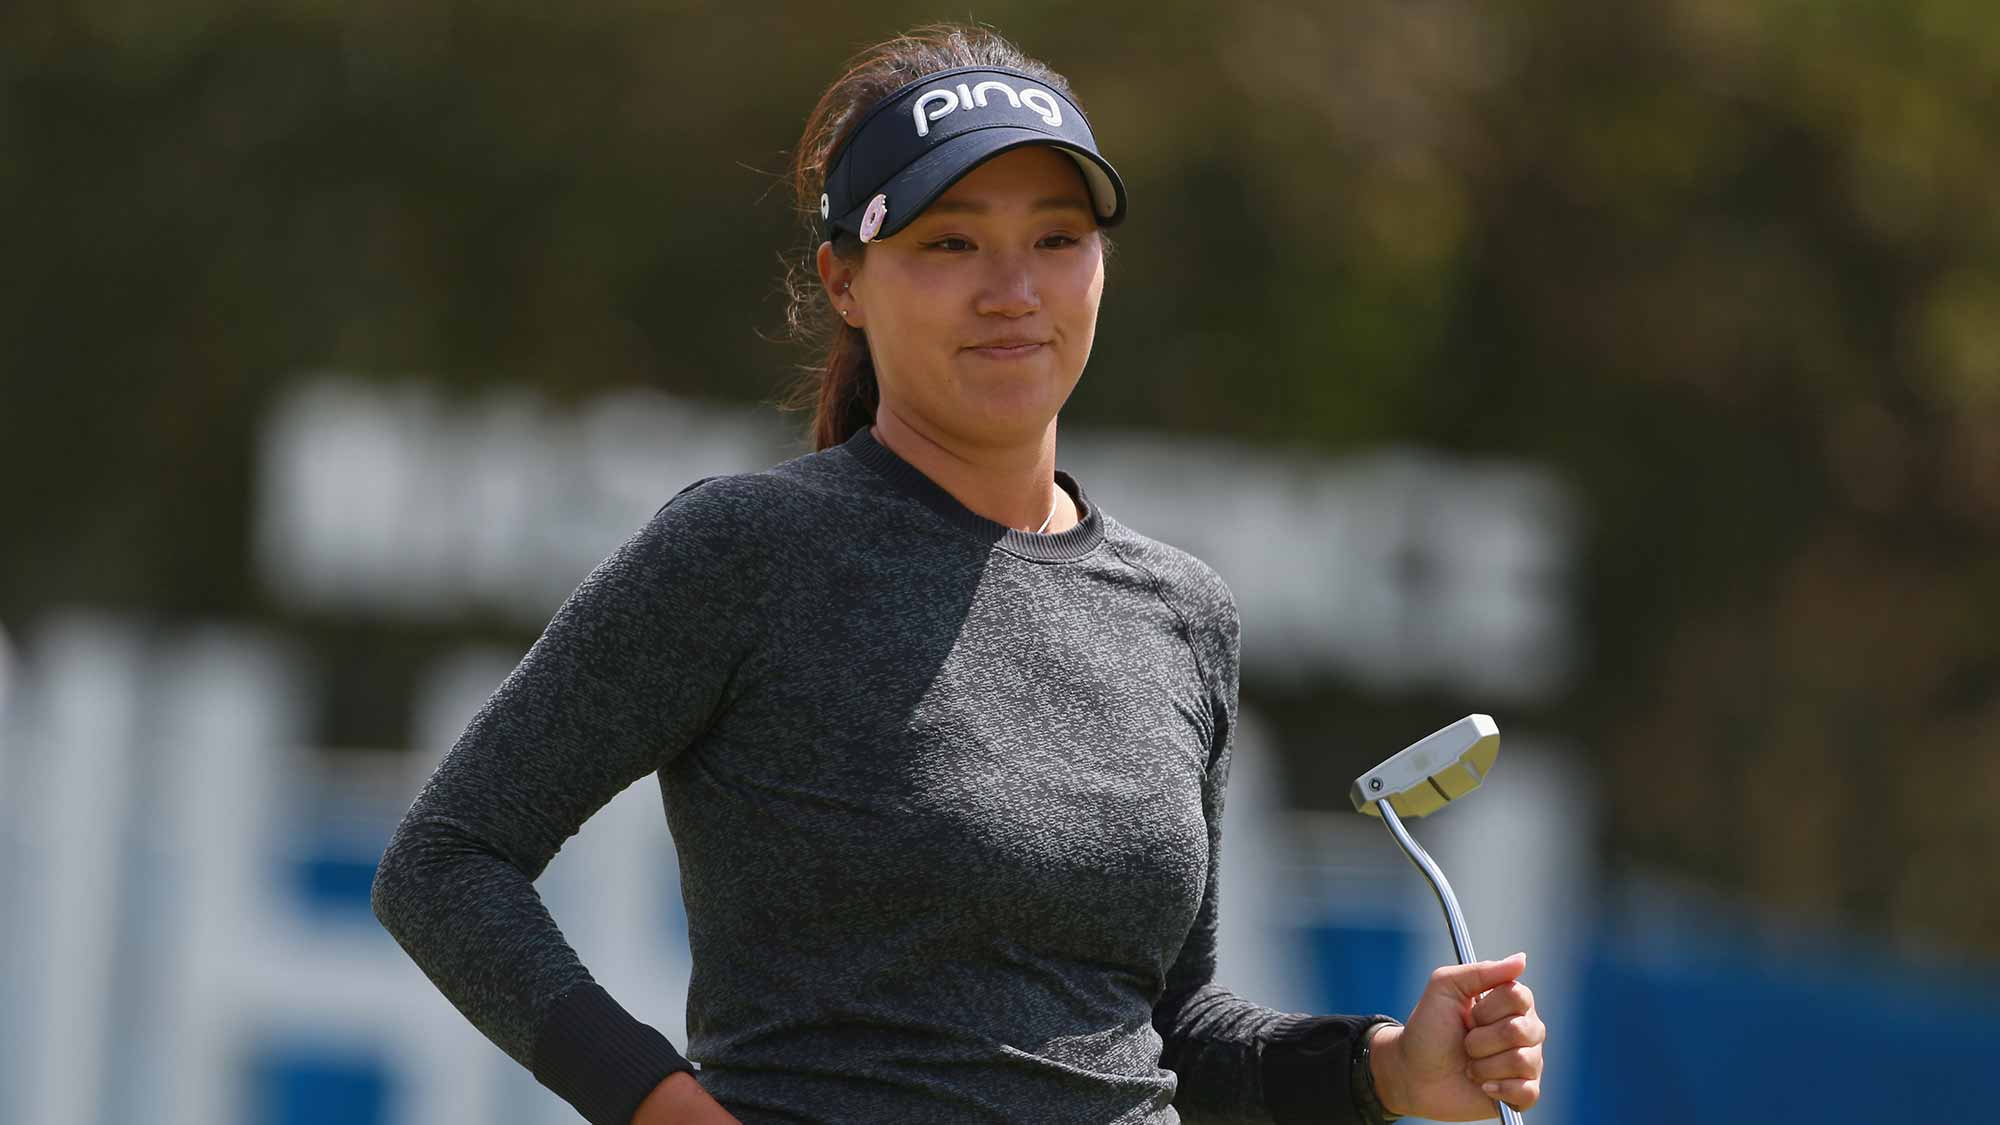 Annie Park waves to the gallery after making a par on the 18th hole during the second round of the LPGA MEDIHEAL Championship at Lake Merced Golf Club on April 27, 2018 in Daly City, California